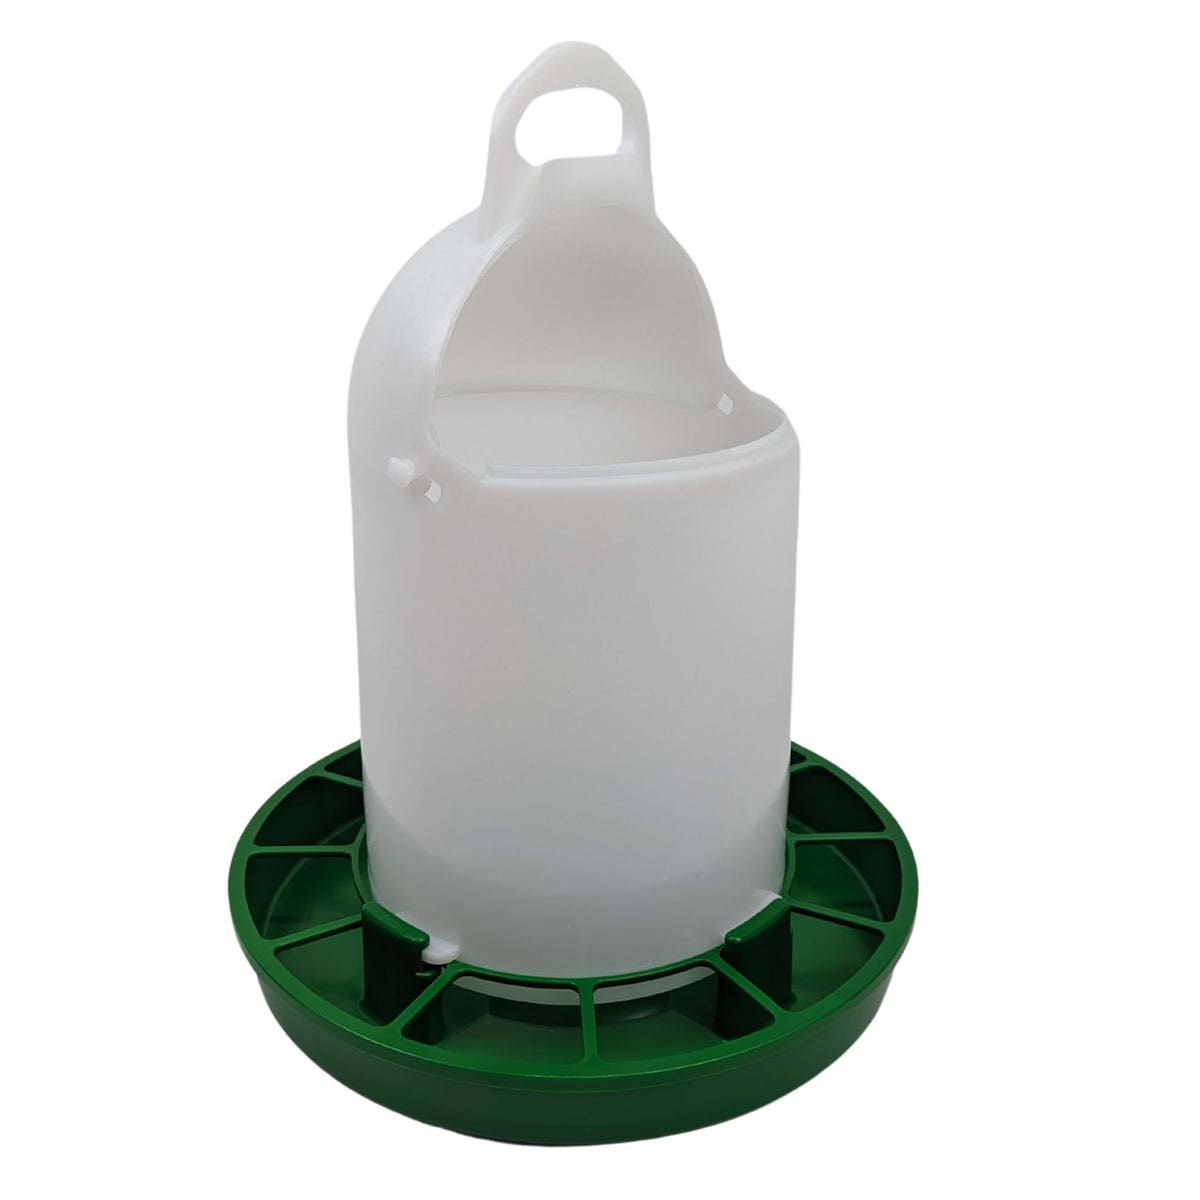 Top Fill Poultry Feeder